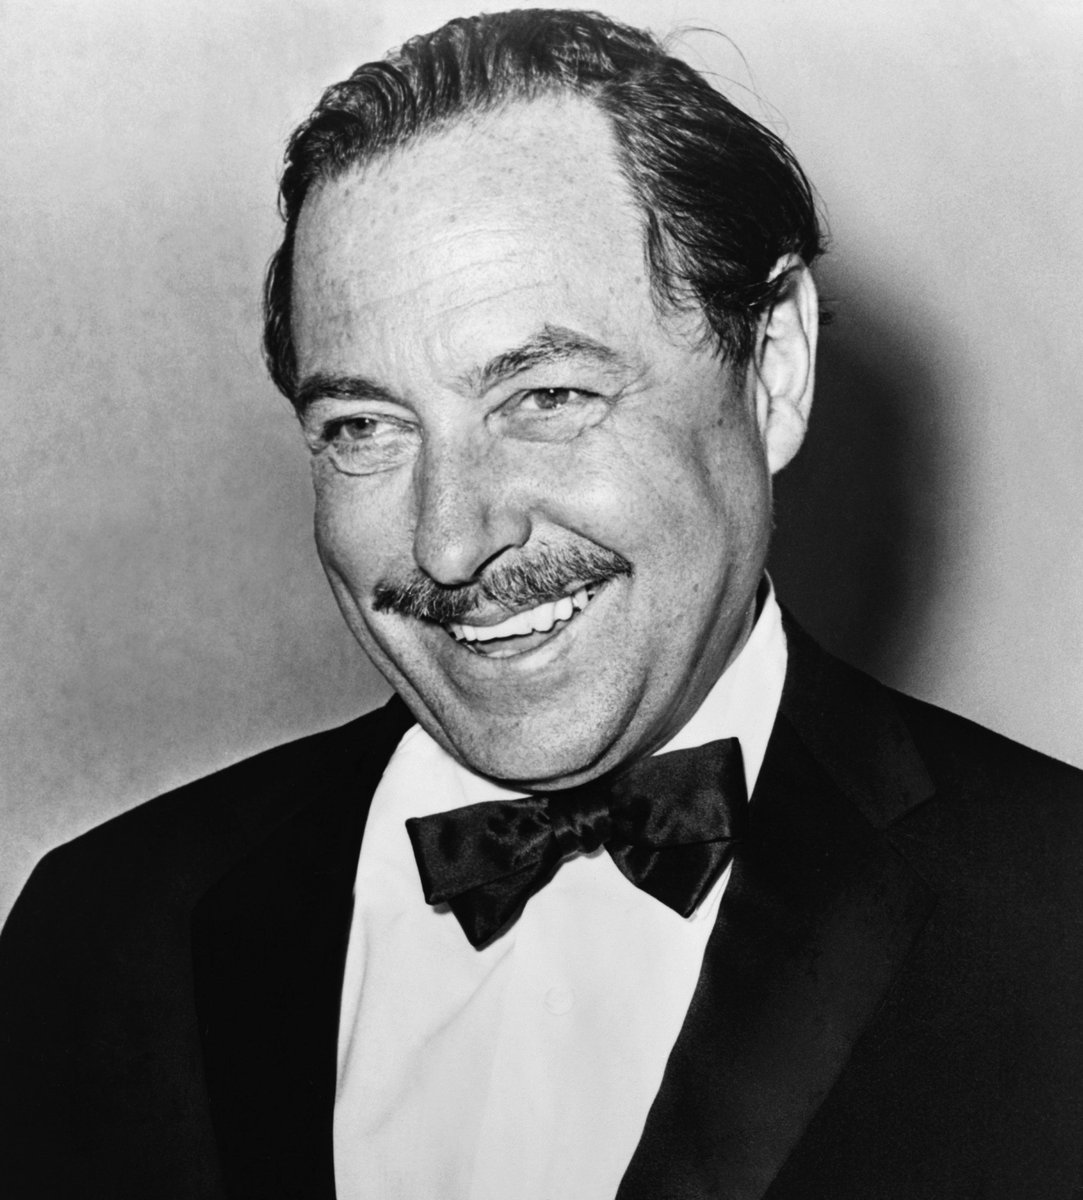 American #playwright #TennesseeWilliams choked to death on a bottle cap #onthisday in 1983.

#otd #writer #TheGlassMenagerie #AStreetcarNamedDesire #CatonaHotTinRoof #SweetBirdofYouth #ThomasLanierWilliams